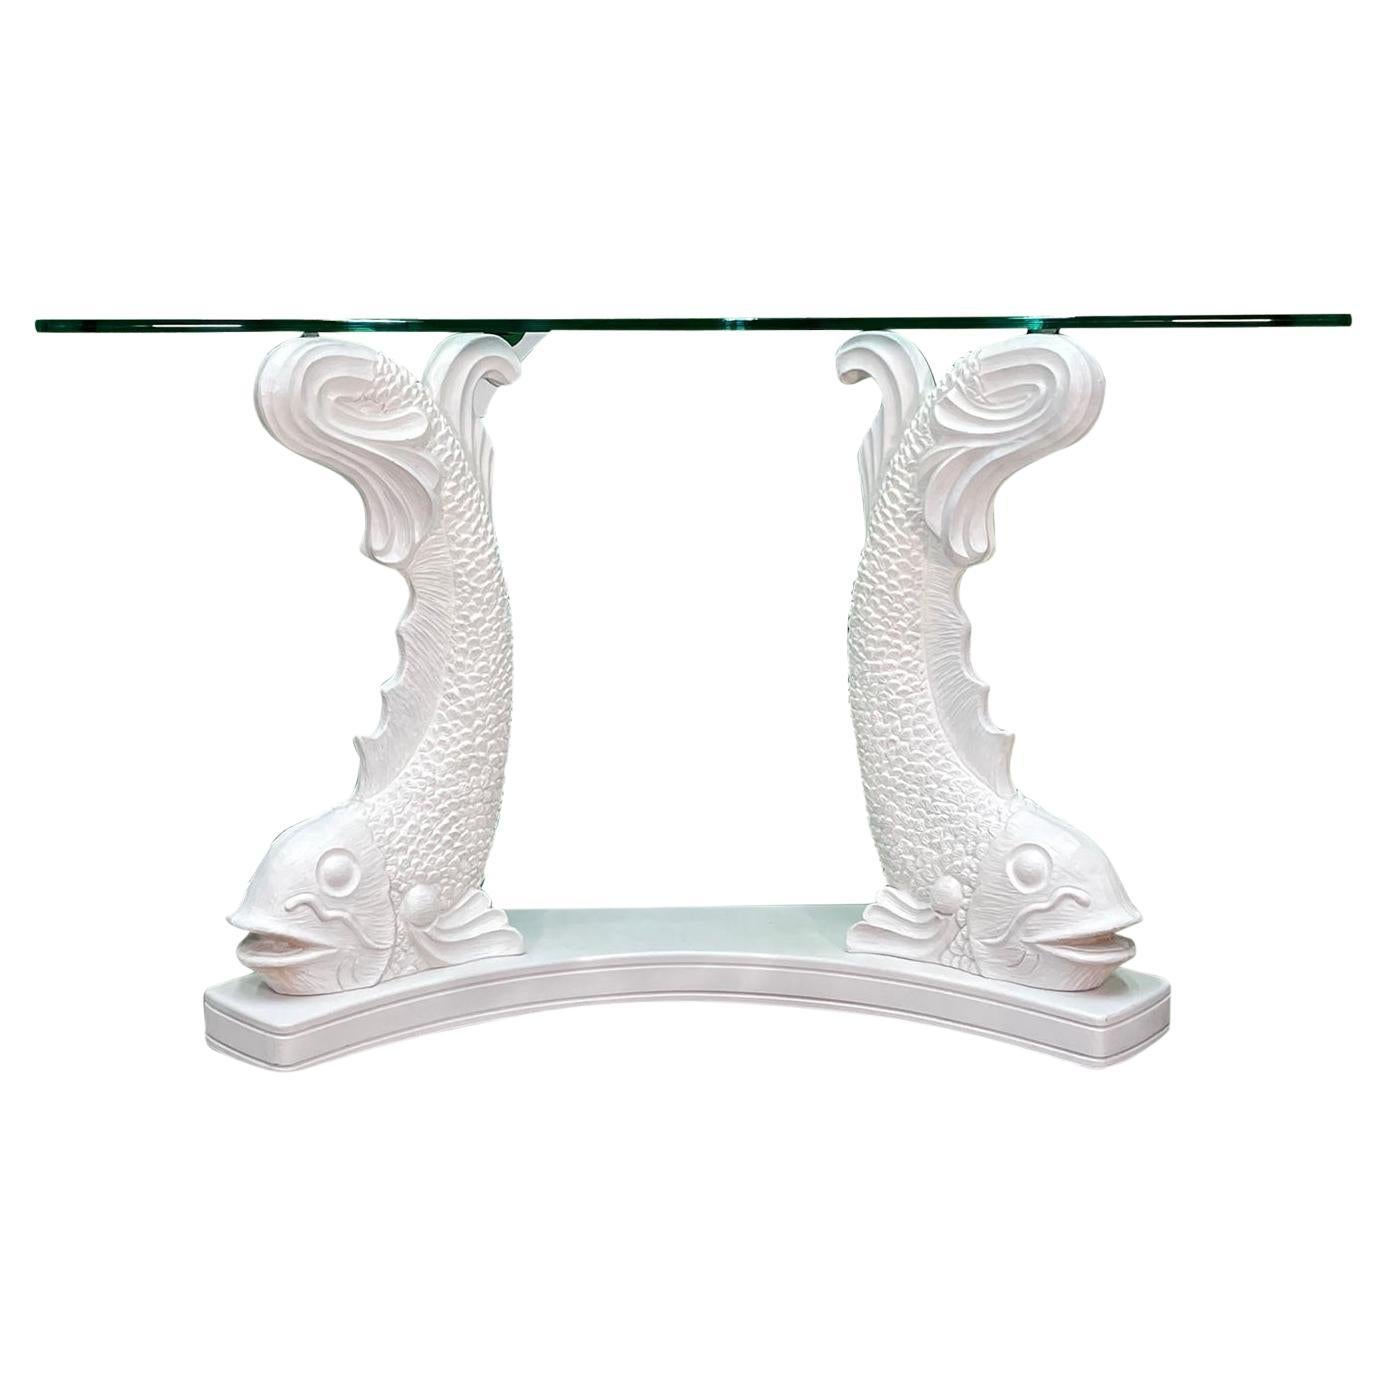 Japanese Koi Fish Sculptural Console Table